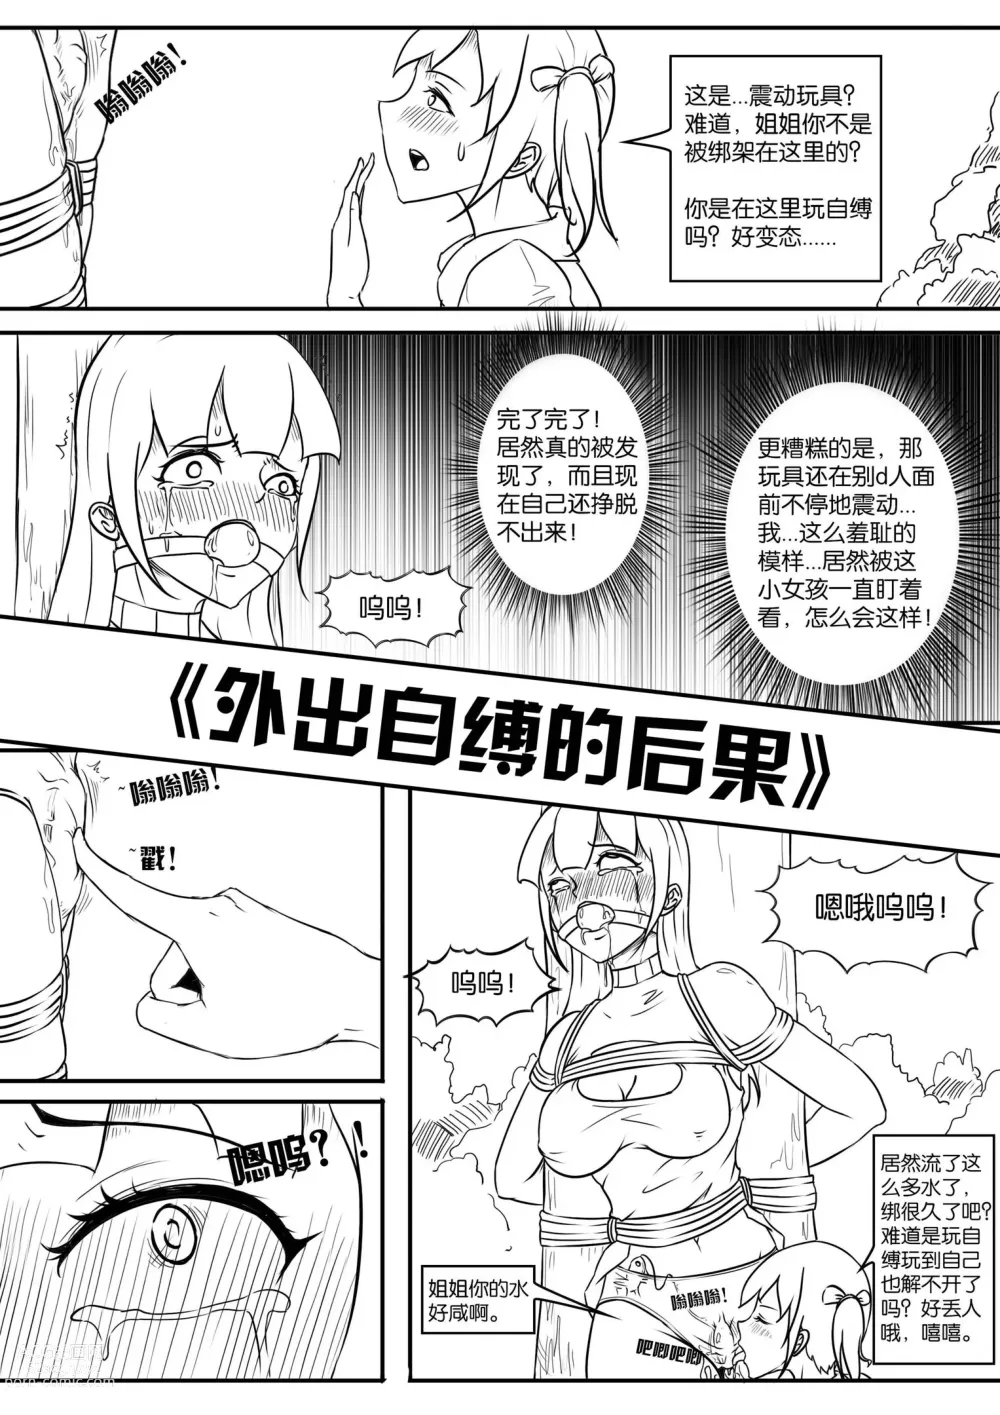 Page 19 of doujinshi The crisis in public self bondage